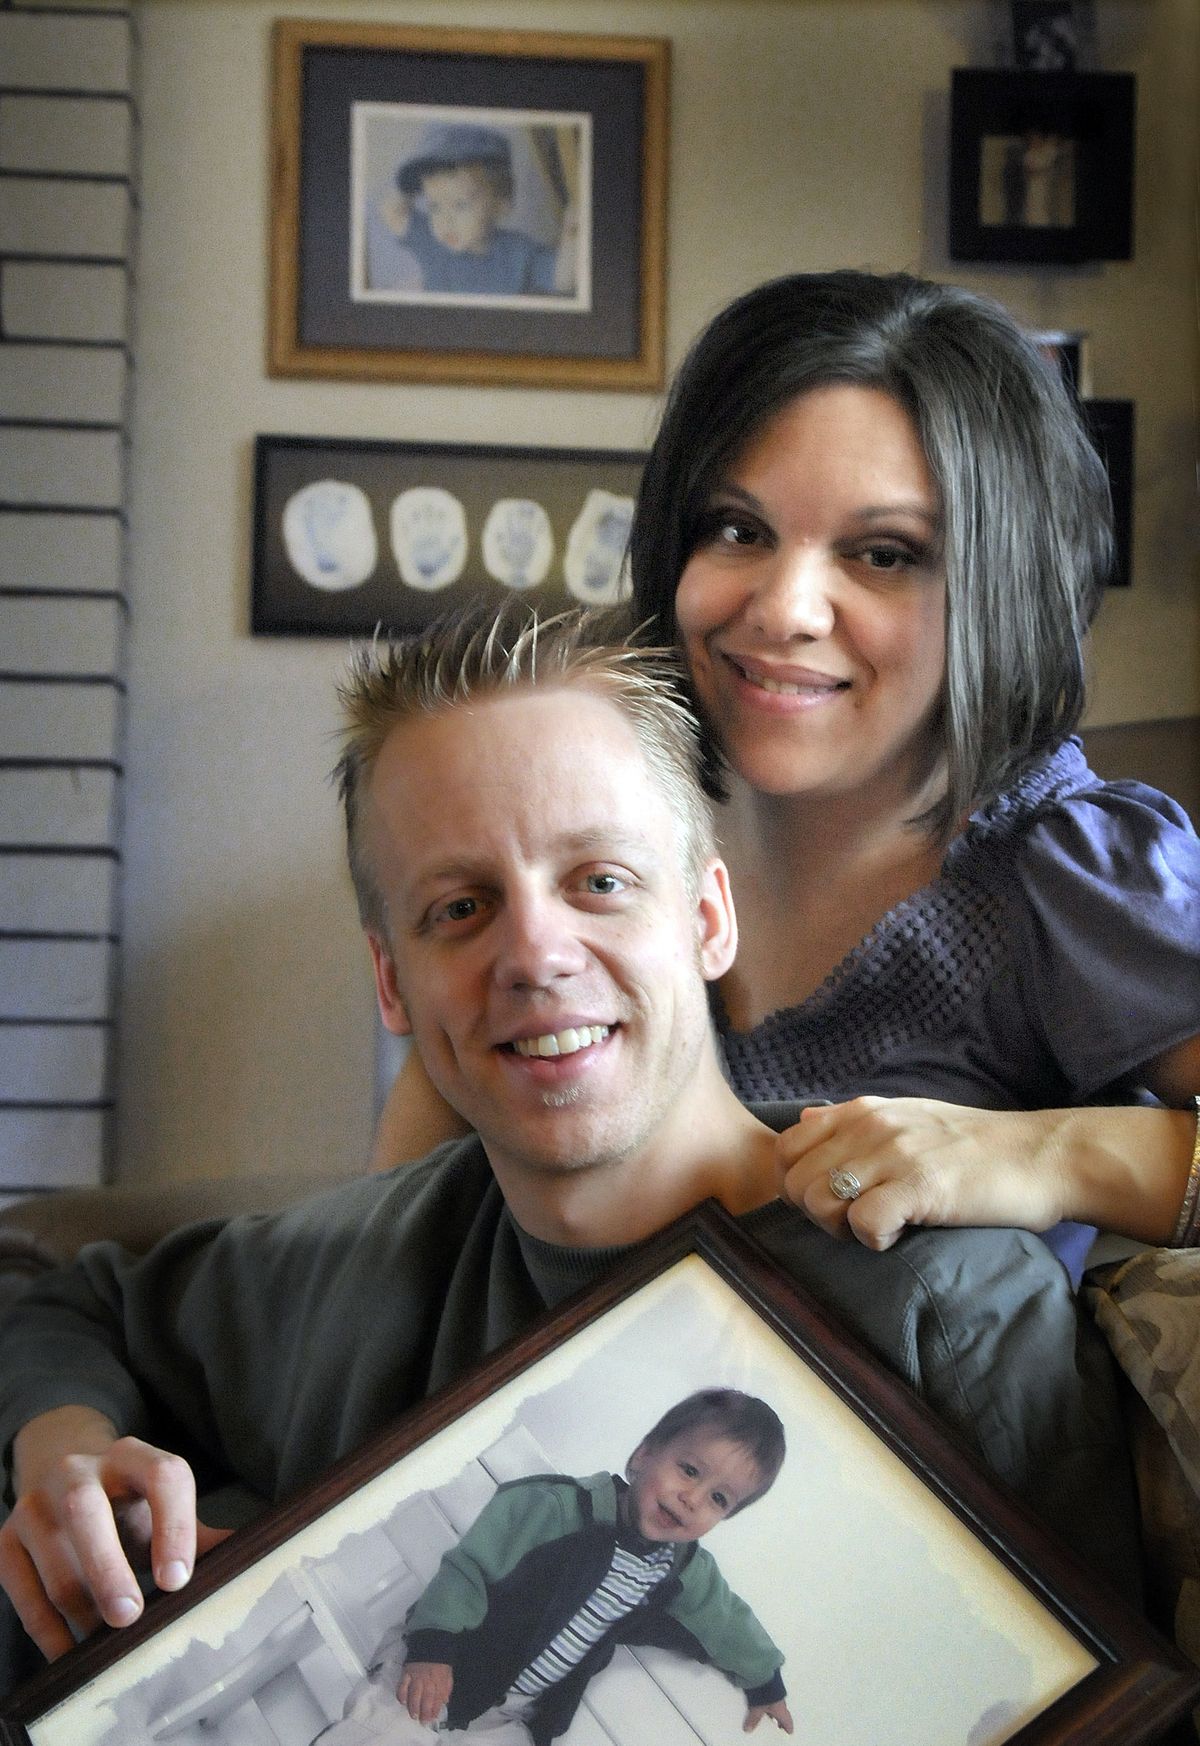 Eric and Jenna Miller are shown  with a photo of their son, Micah, who died  in  2003. The footprints and handprints of Micah are on the wall behind them.  (CHRISTOPHER ANDERSON / The Spokesman-Review)